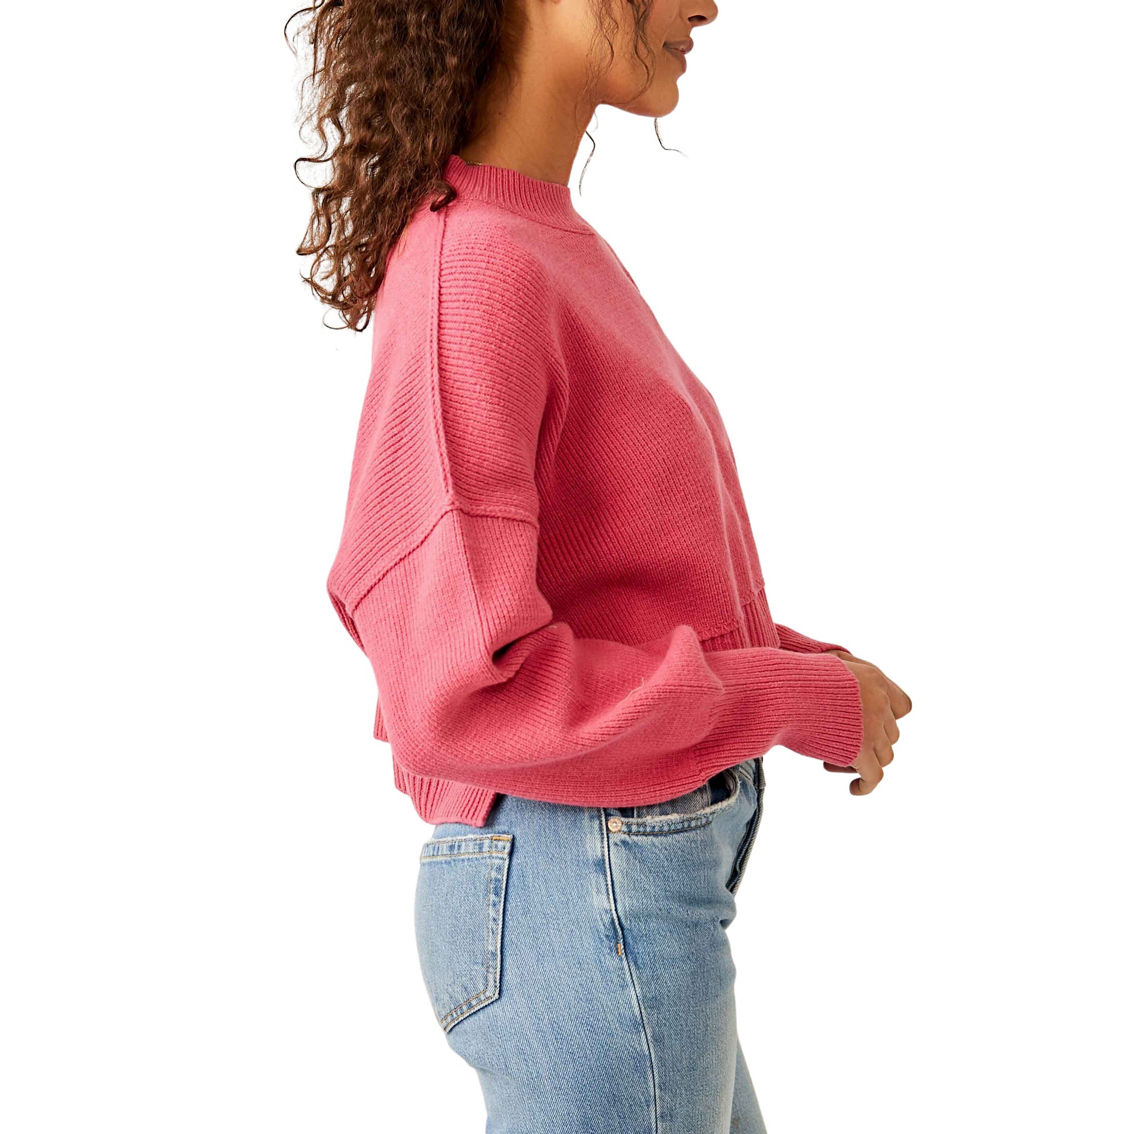 Free People Easy Street Crop Pullover - Image 3 of 4